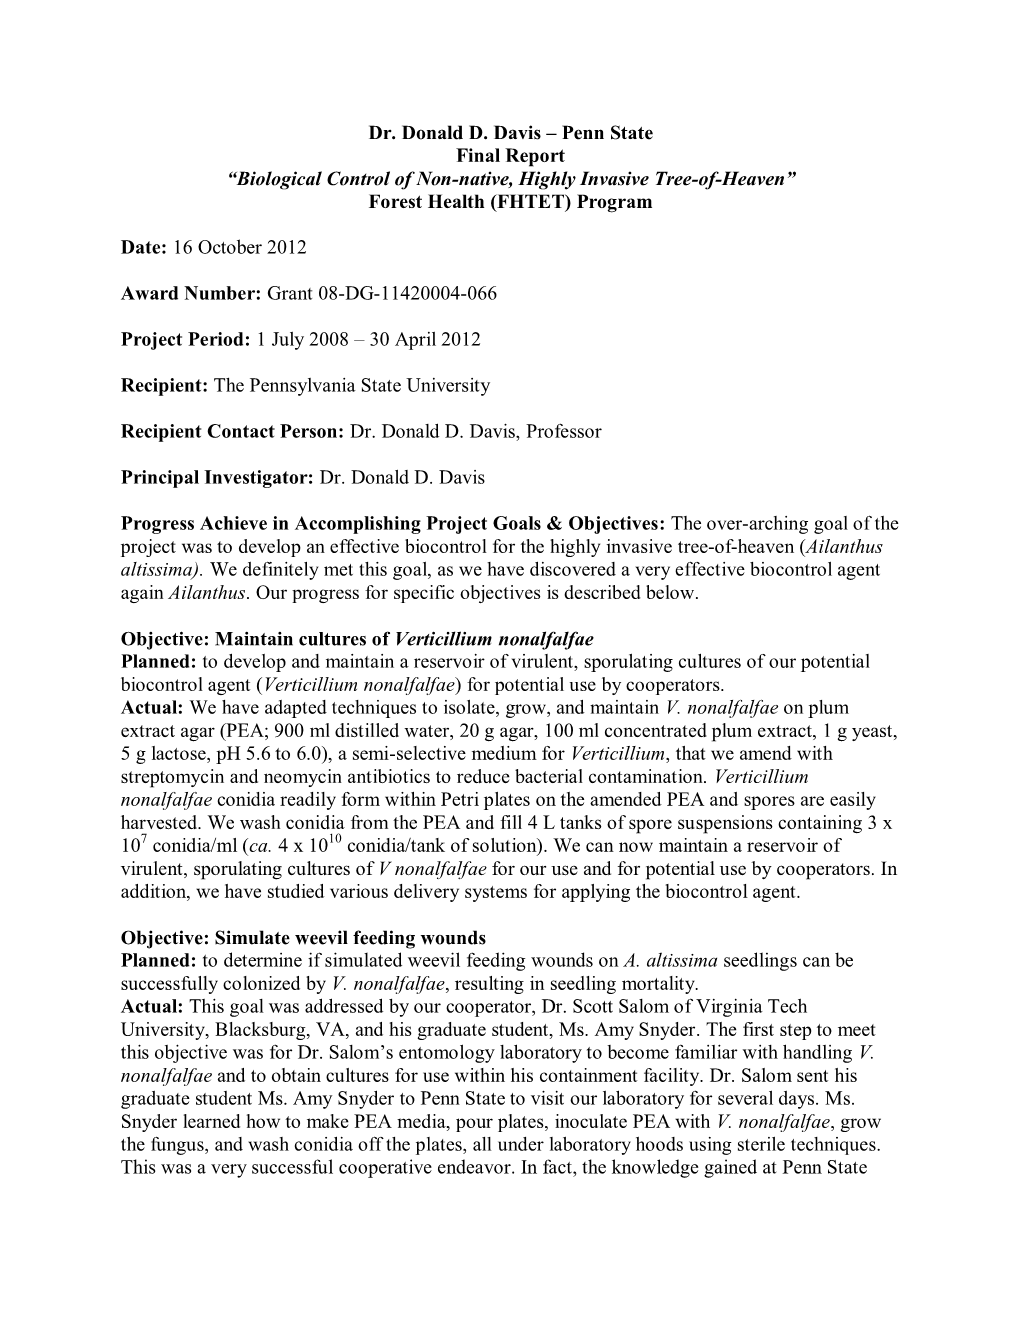 Dr. Donald D. Davis – Penn State Final Report “Biological Control of Non-Native, Highly Invasive Tree-Of-Heaven” Forest Health (FHTET) Program